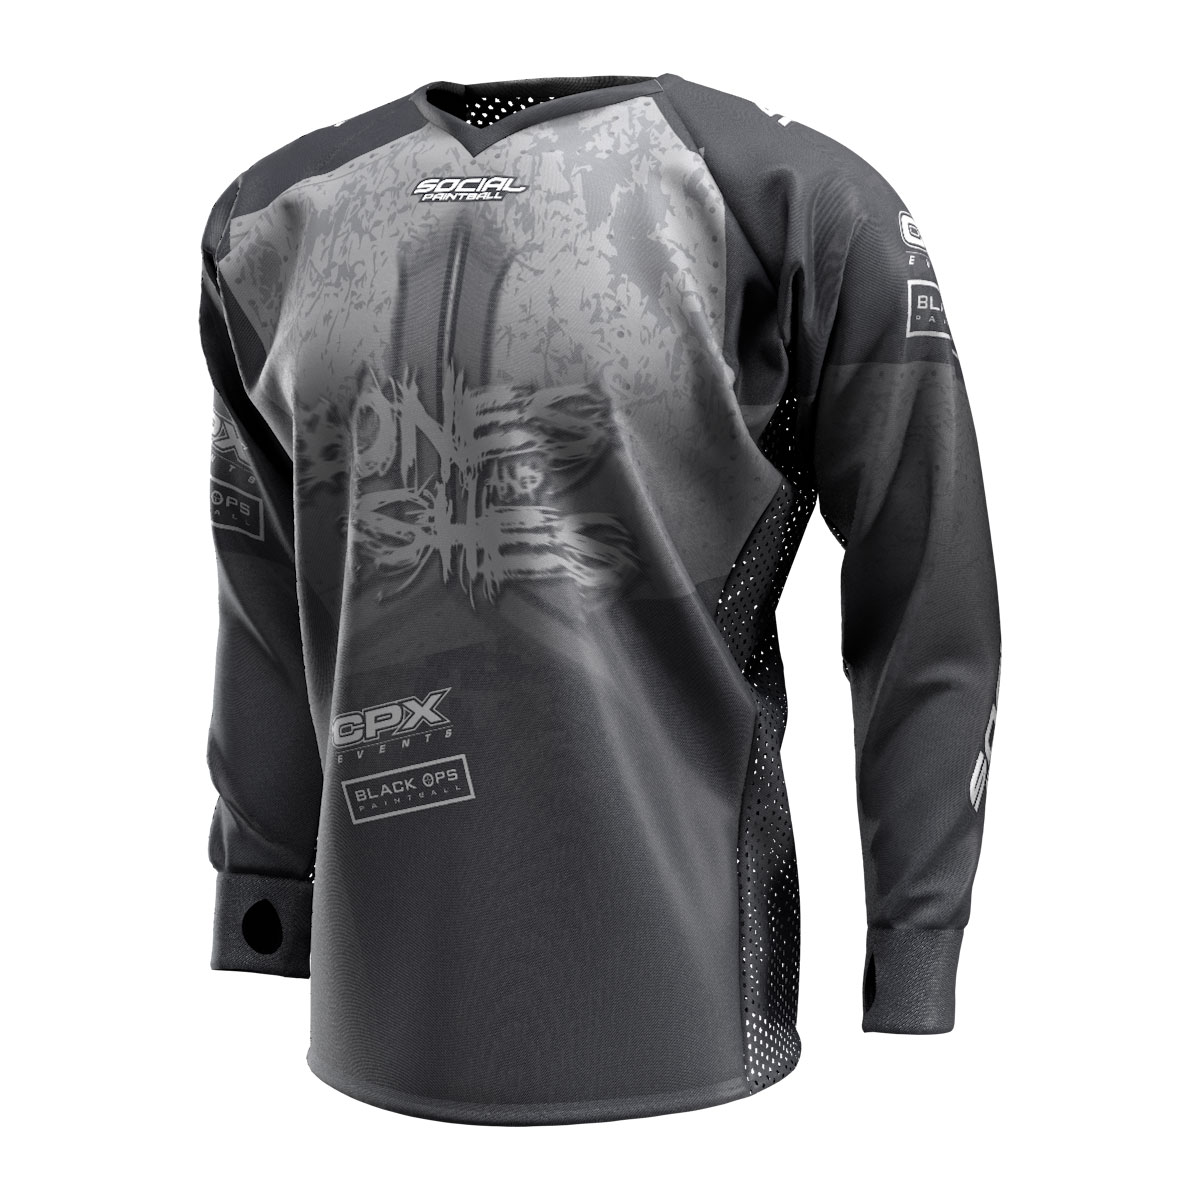 2020/21 CPX Bones and Ashes 3 Custom Event SMPL Jersey - Social Paintball